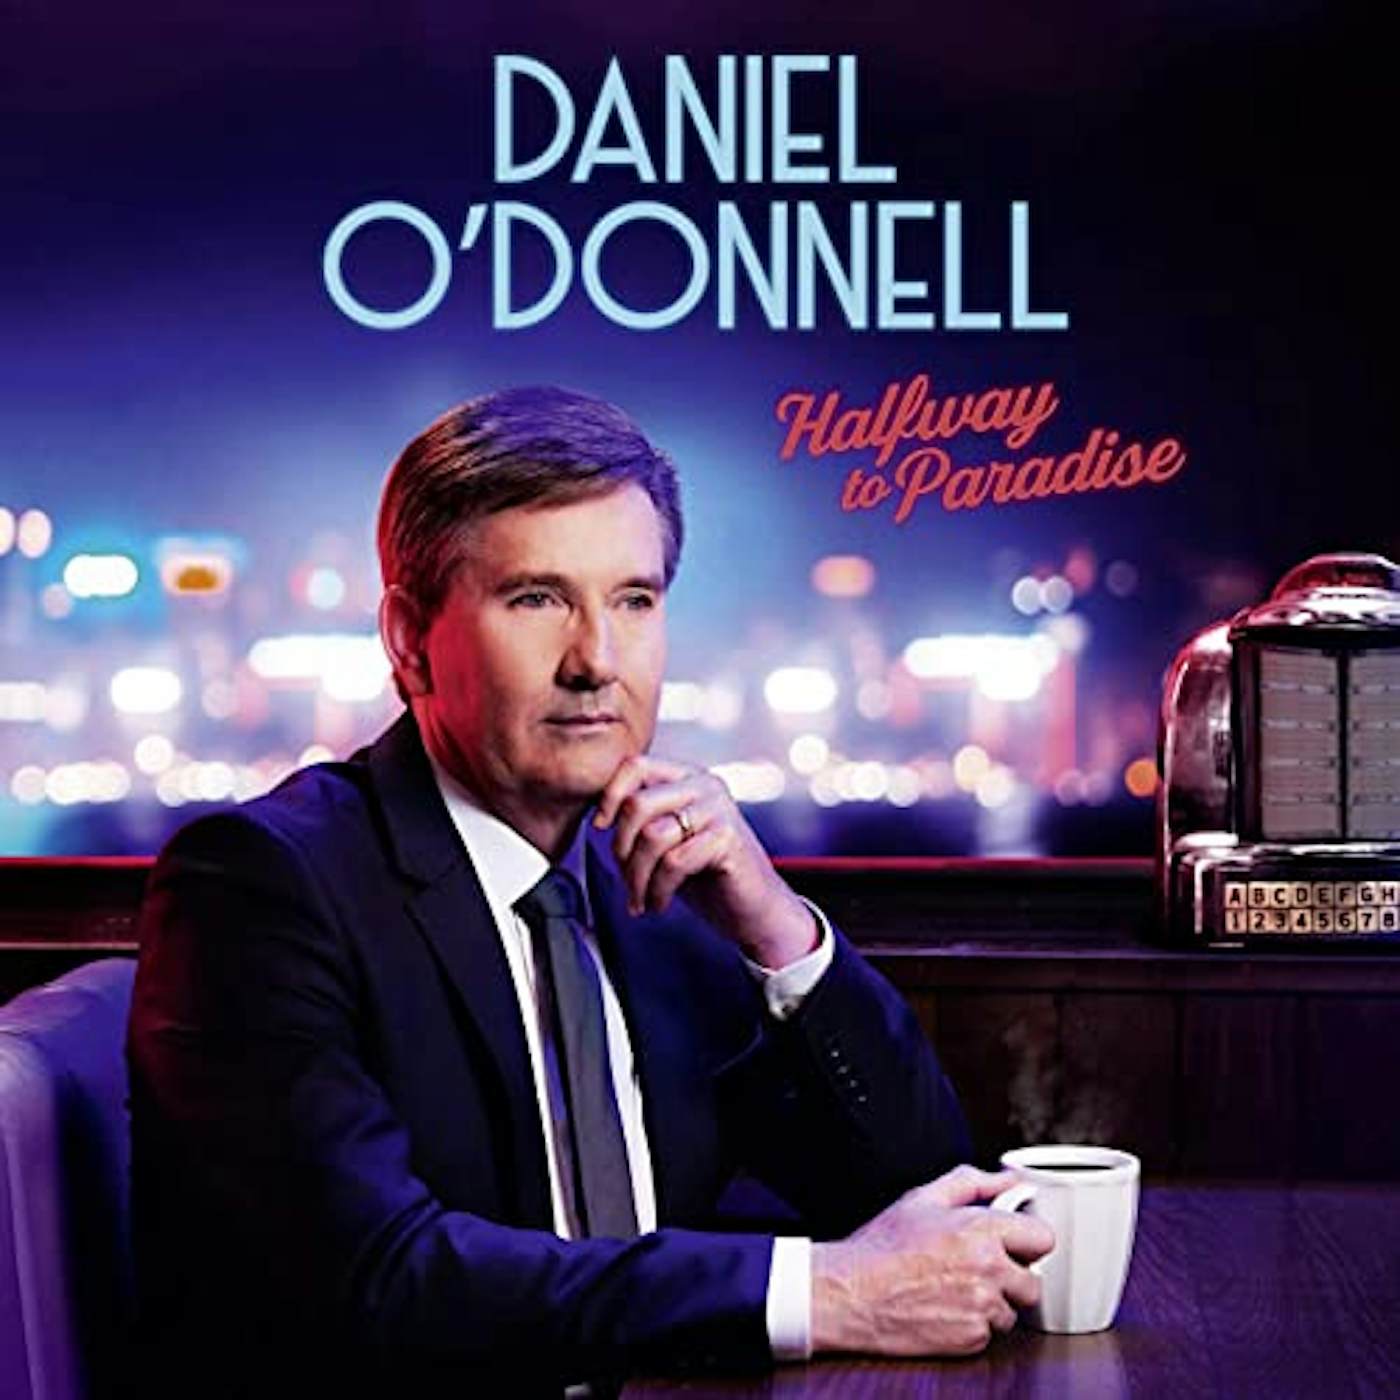 Daniel O'Donnell HALFWAY TO PARADISE CD